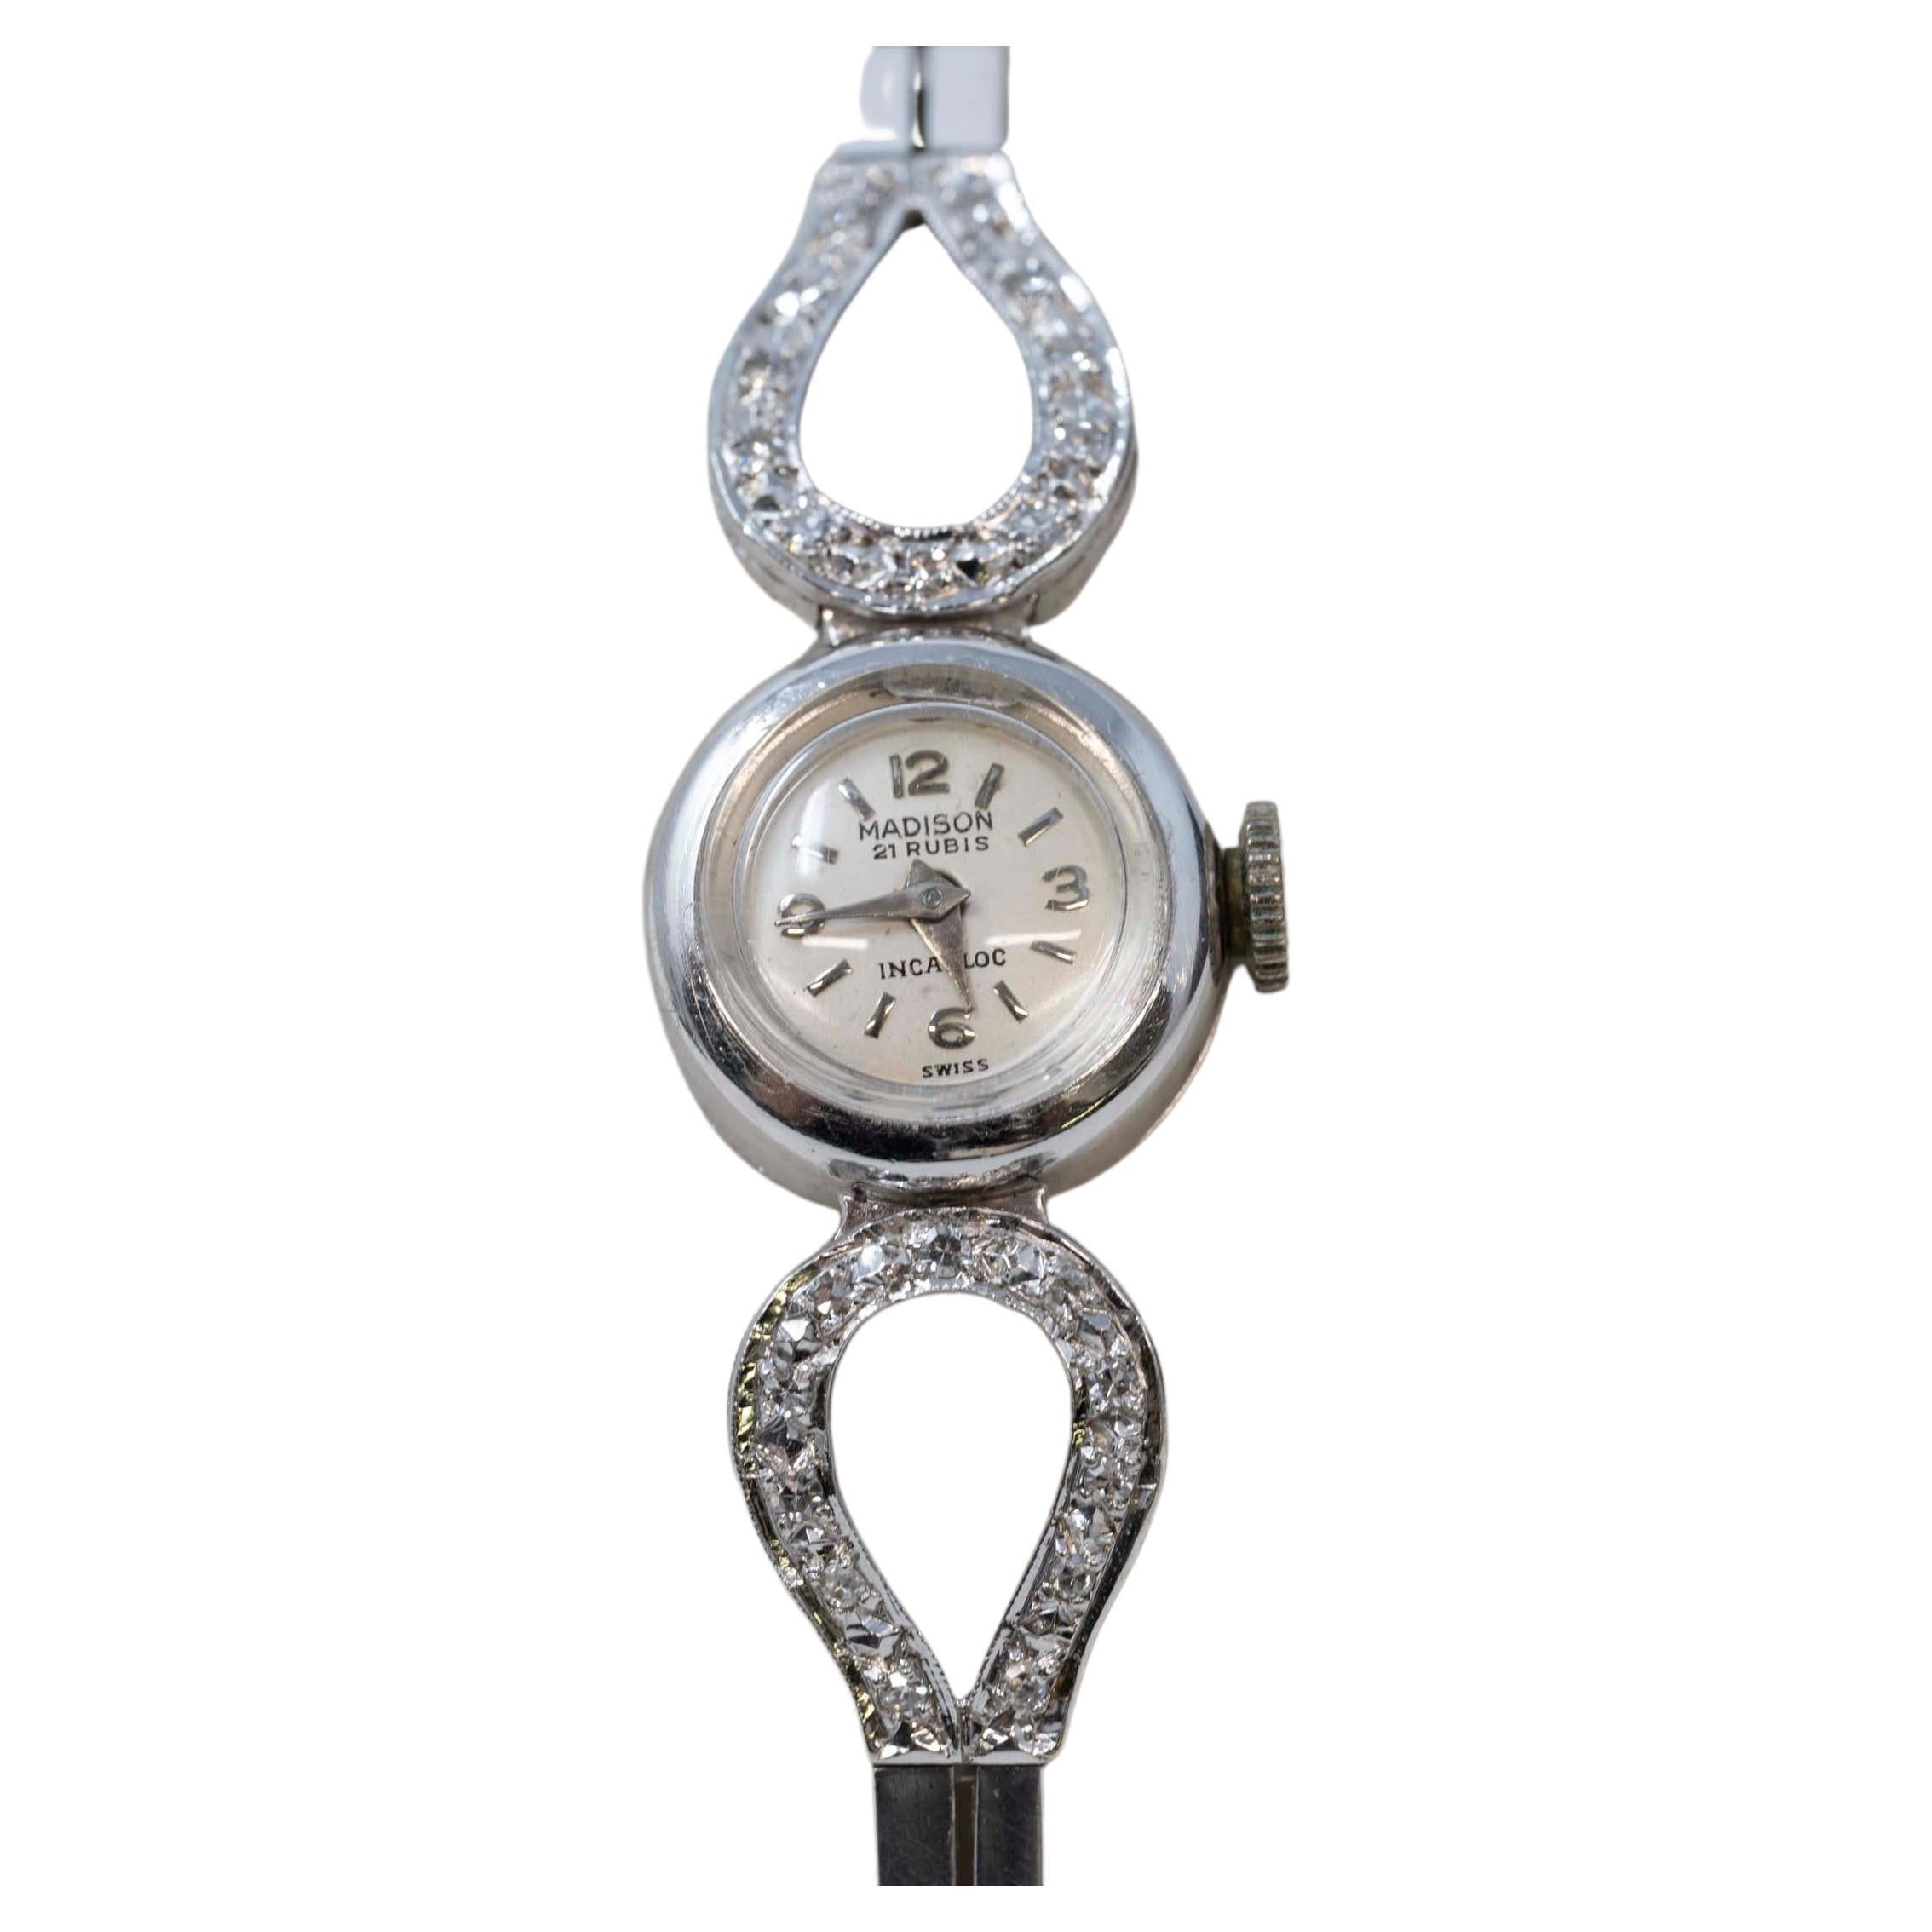 Madison 21 Ruby 14k White Gold Ladies Watch For Sale